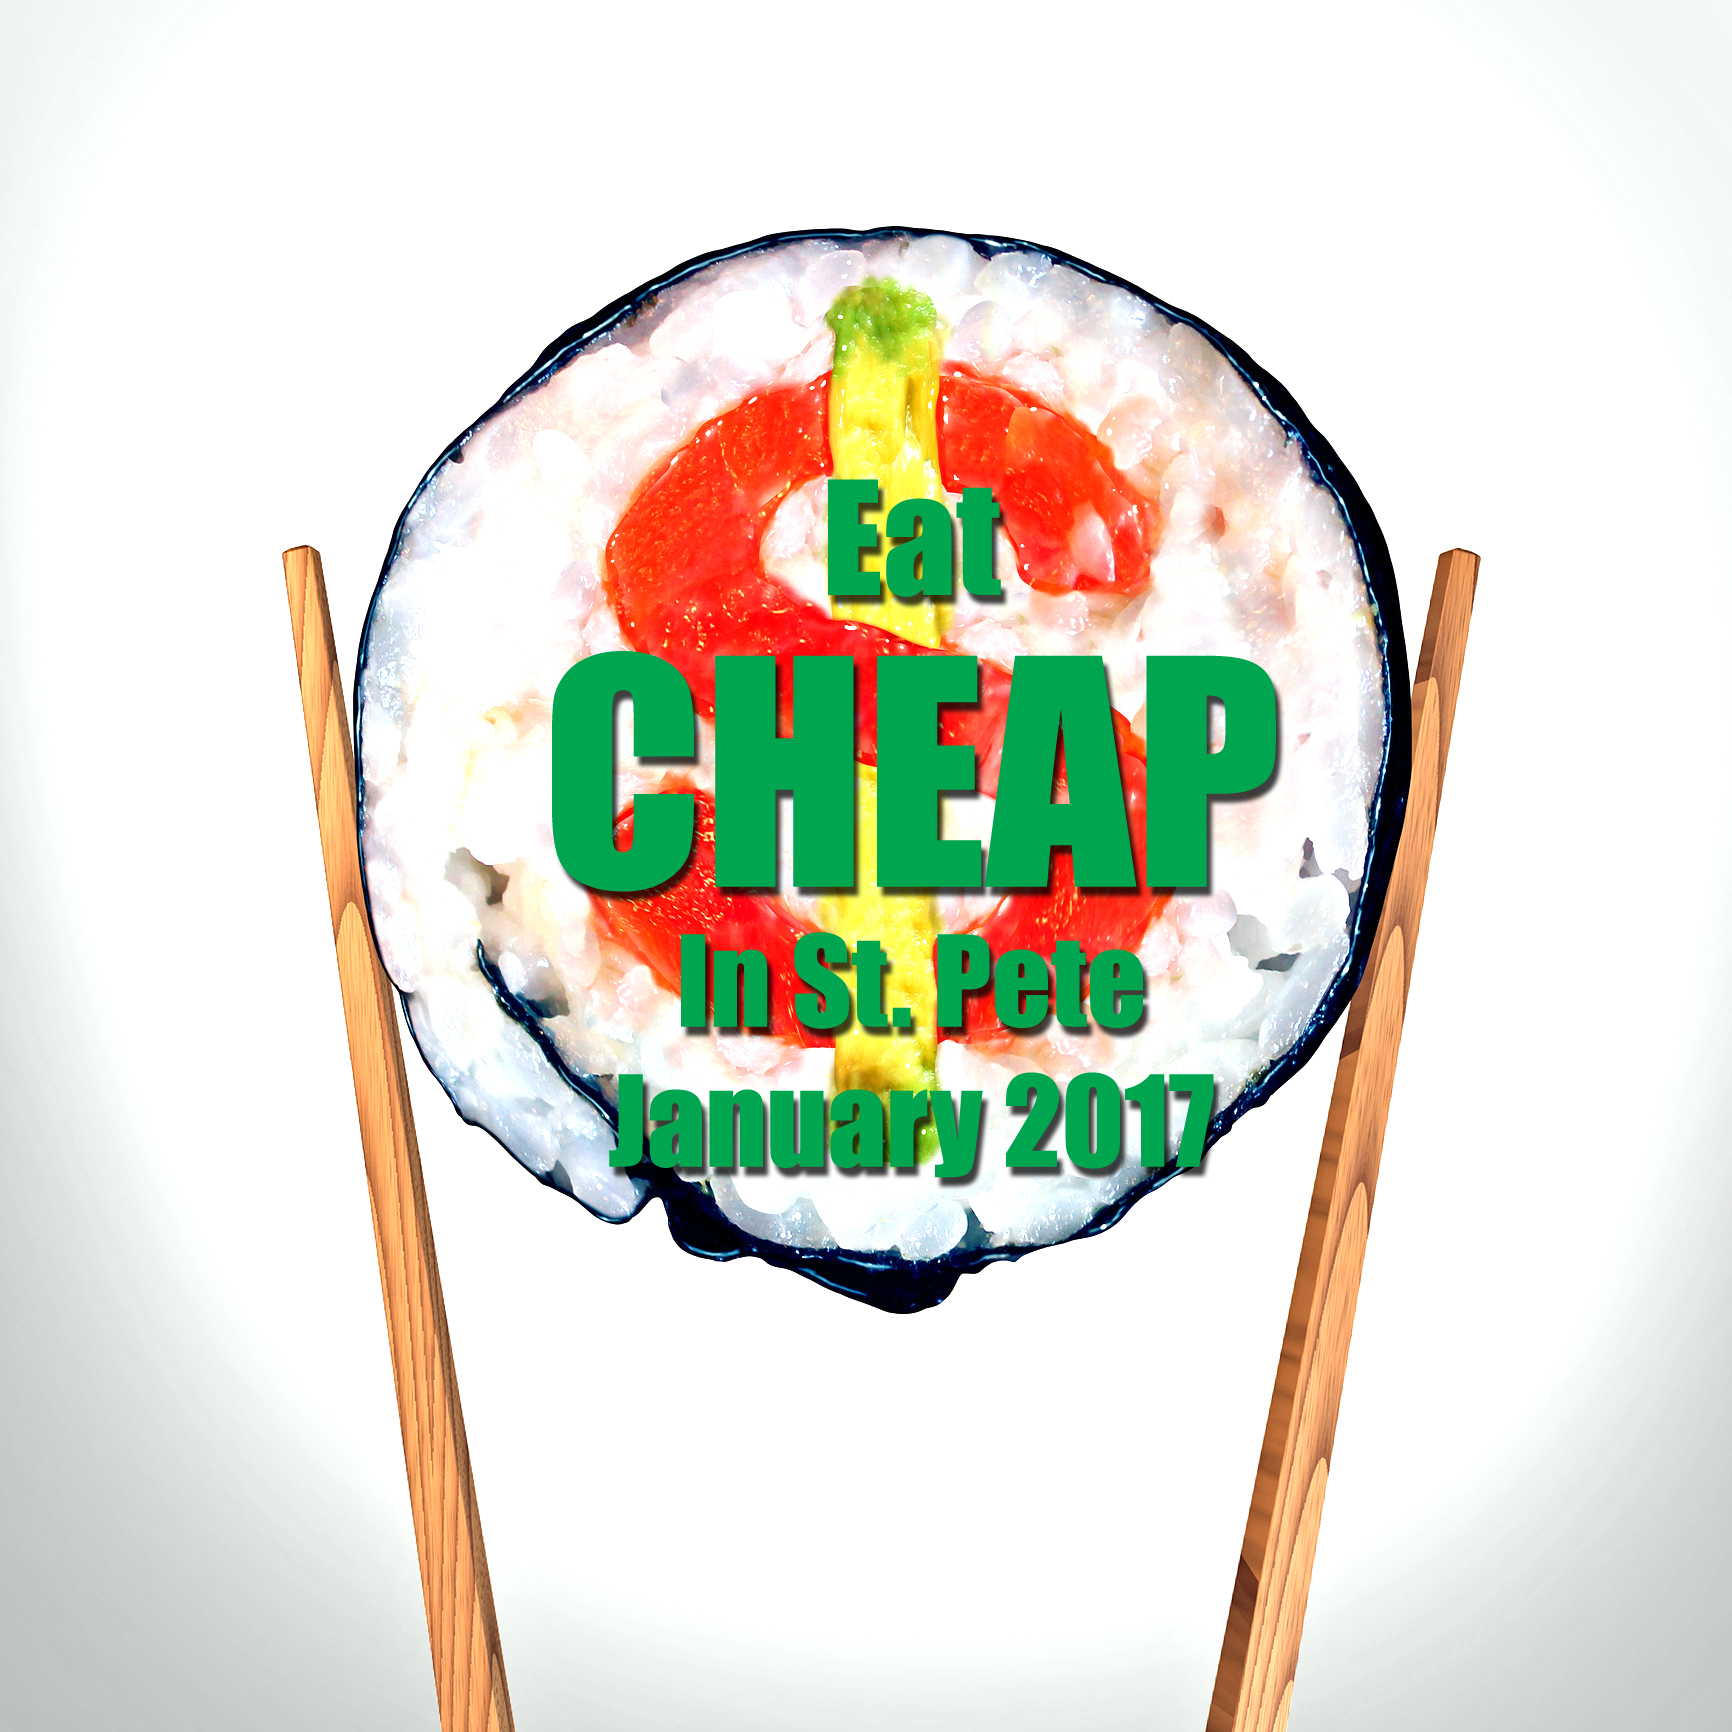 Eat Cheap in St. Pete January 2017